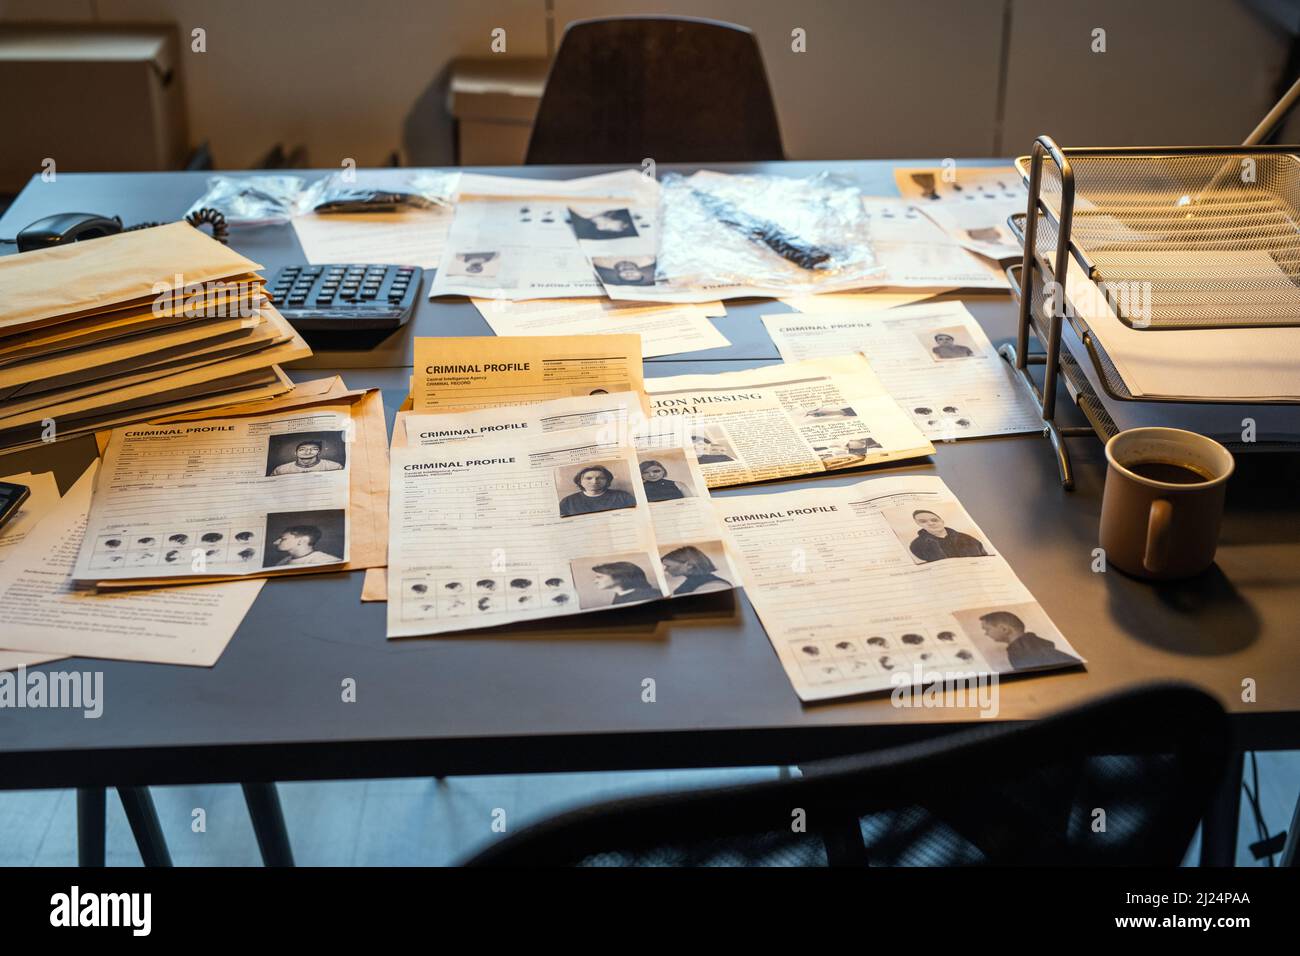 Workplace of fbi agent with criminal profiles, evidences and clues, stacks of packed documents or journals with information Stock Photo